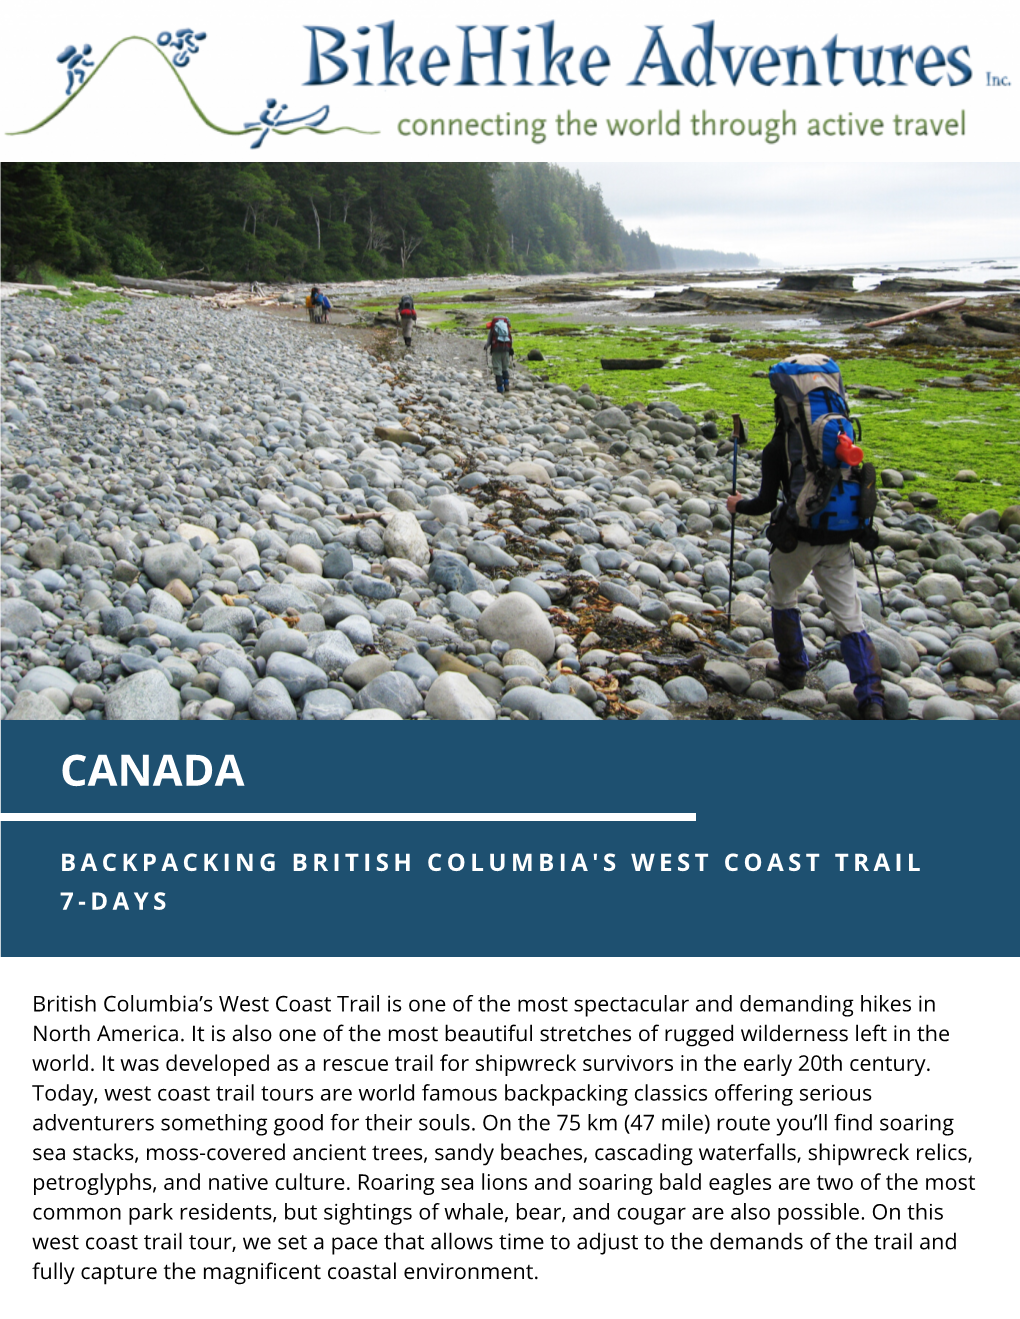 *DI Backpacking the West Coast Trail 7